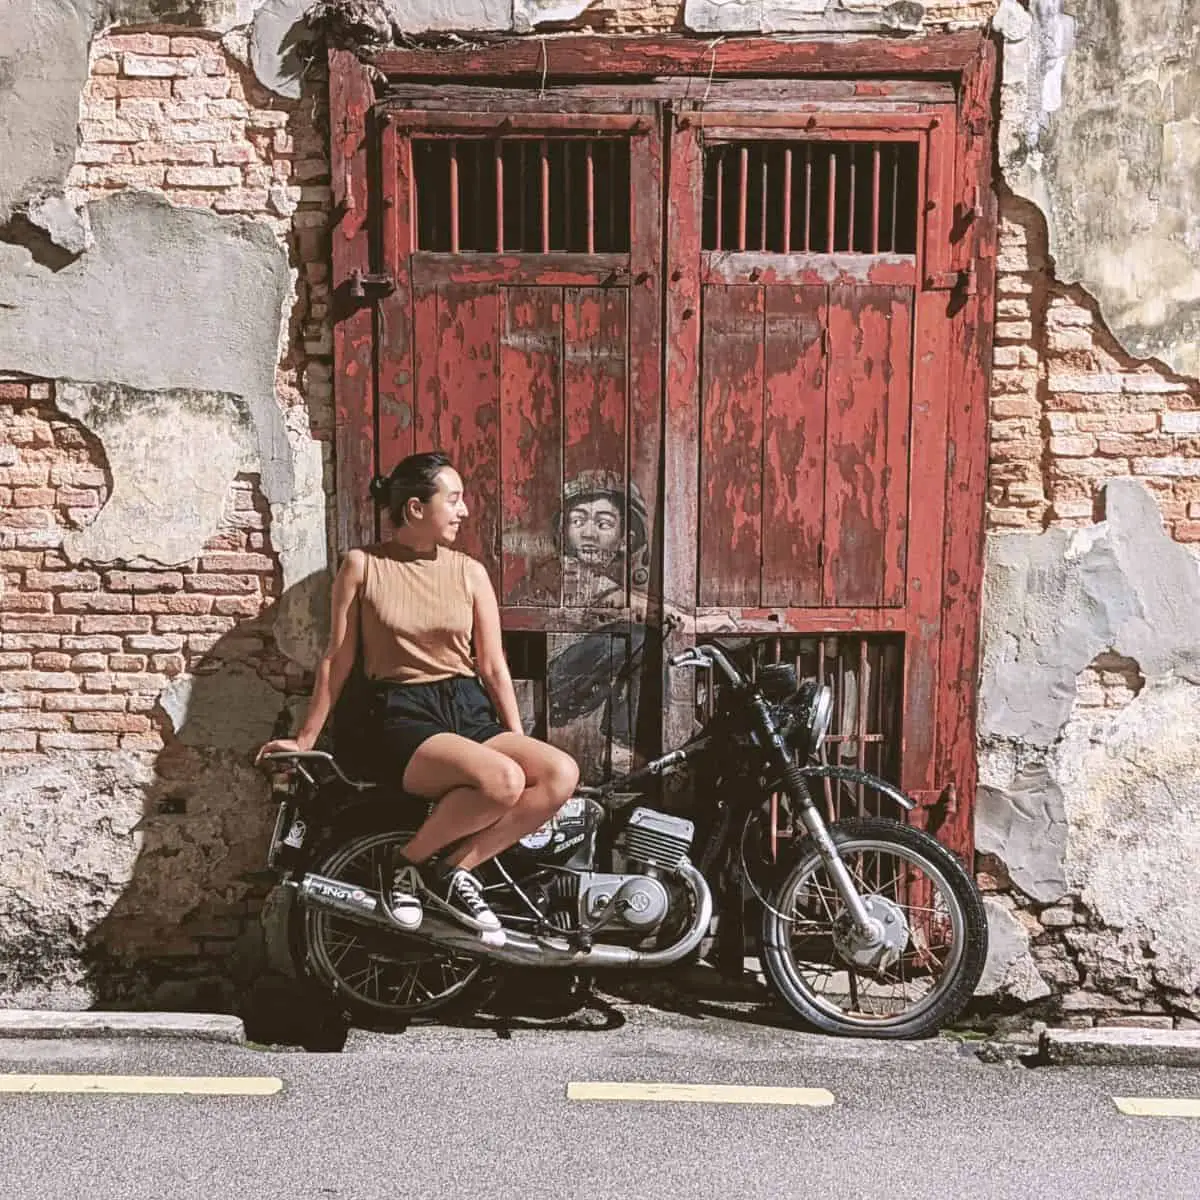 Penang travel plan Lebuh Ah Quee Street Art by Ernest Zacharevic Boy on Motorbike Victoria on the bike